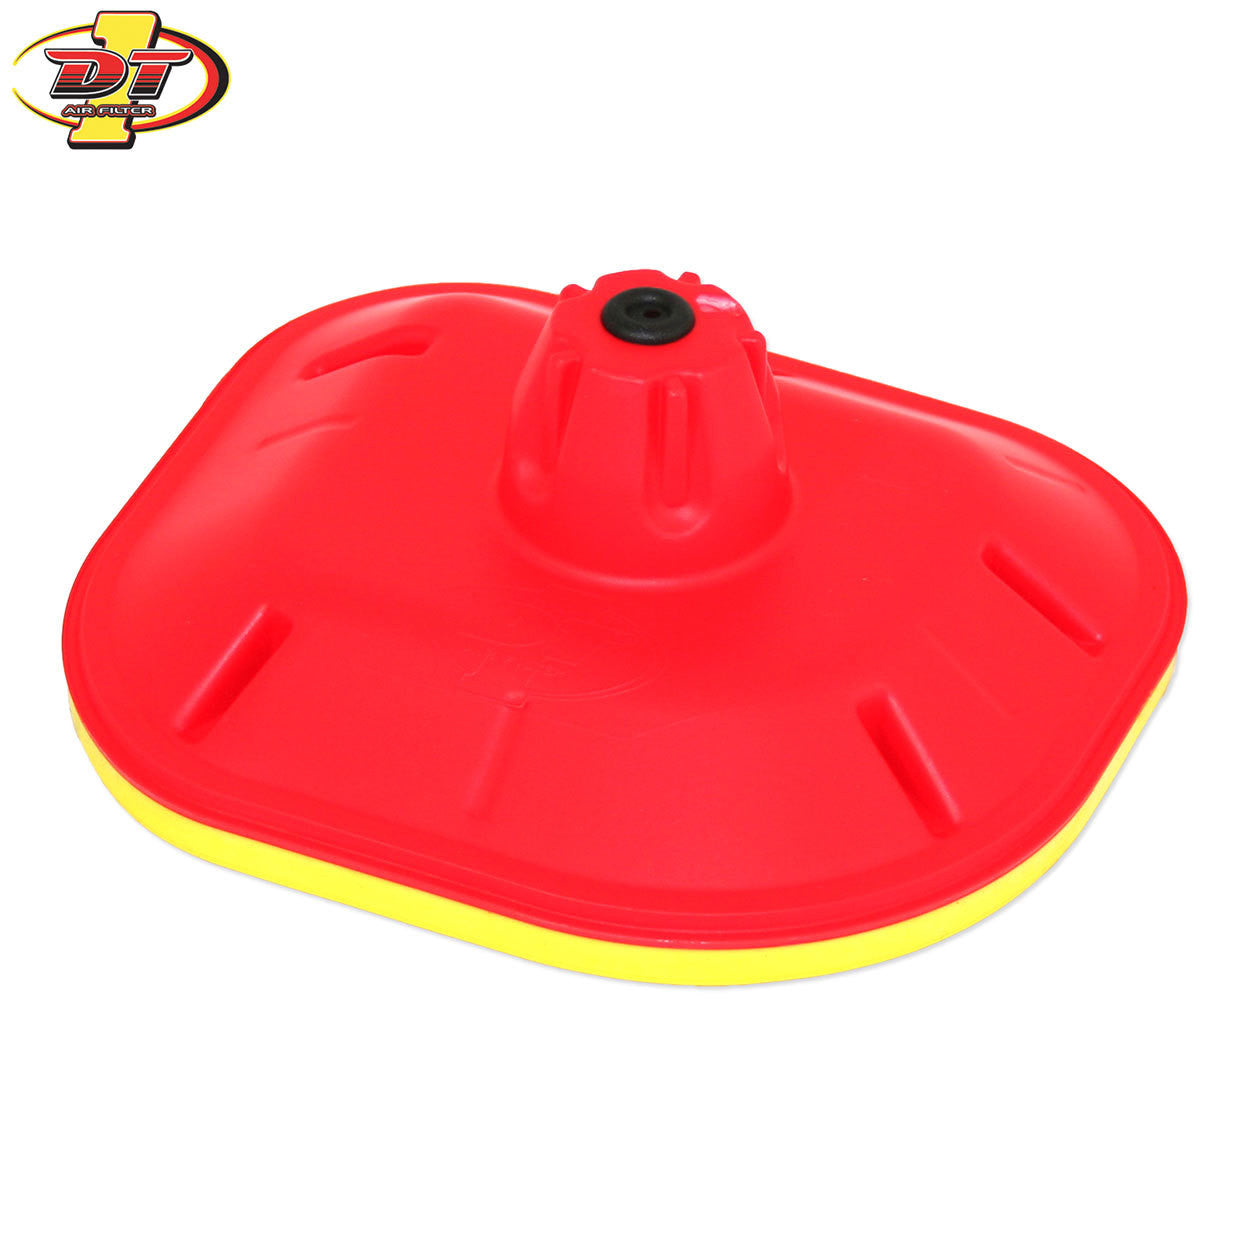 DT1 - Air Filter Washing Cover